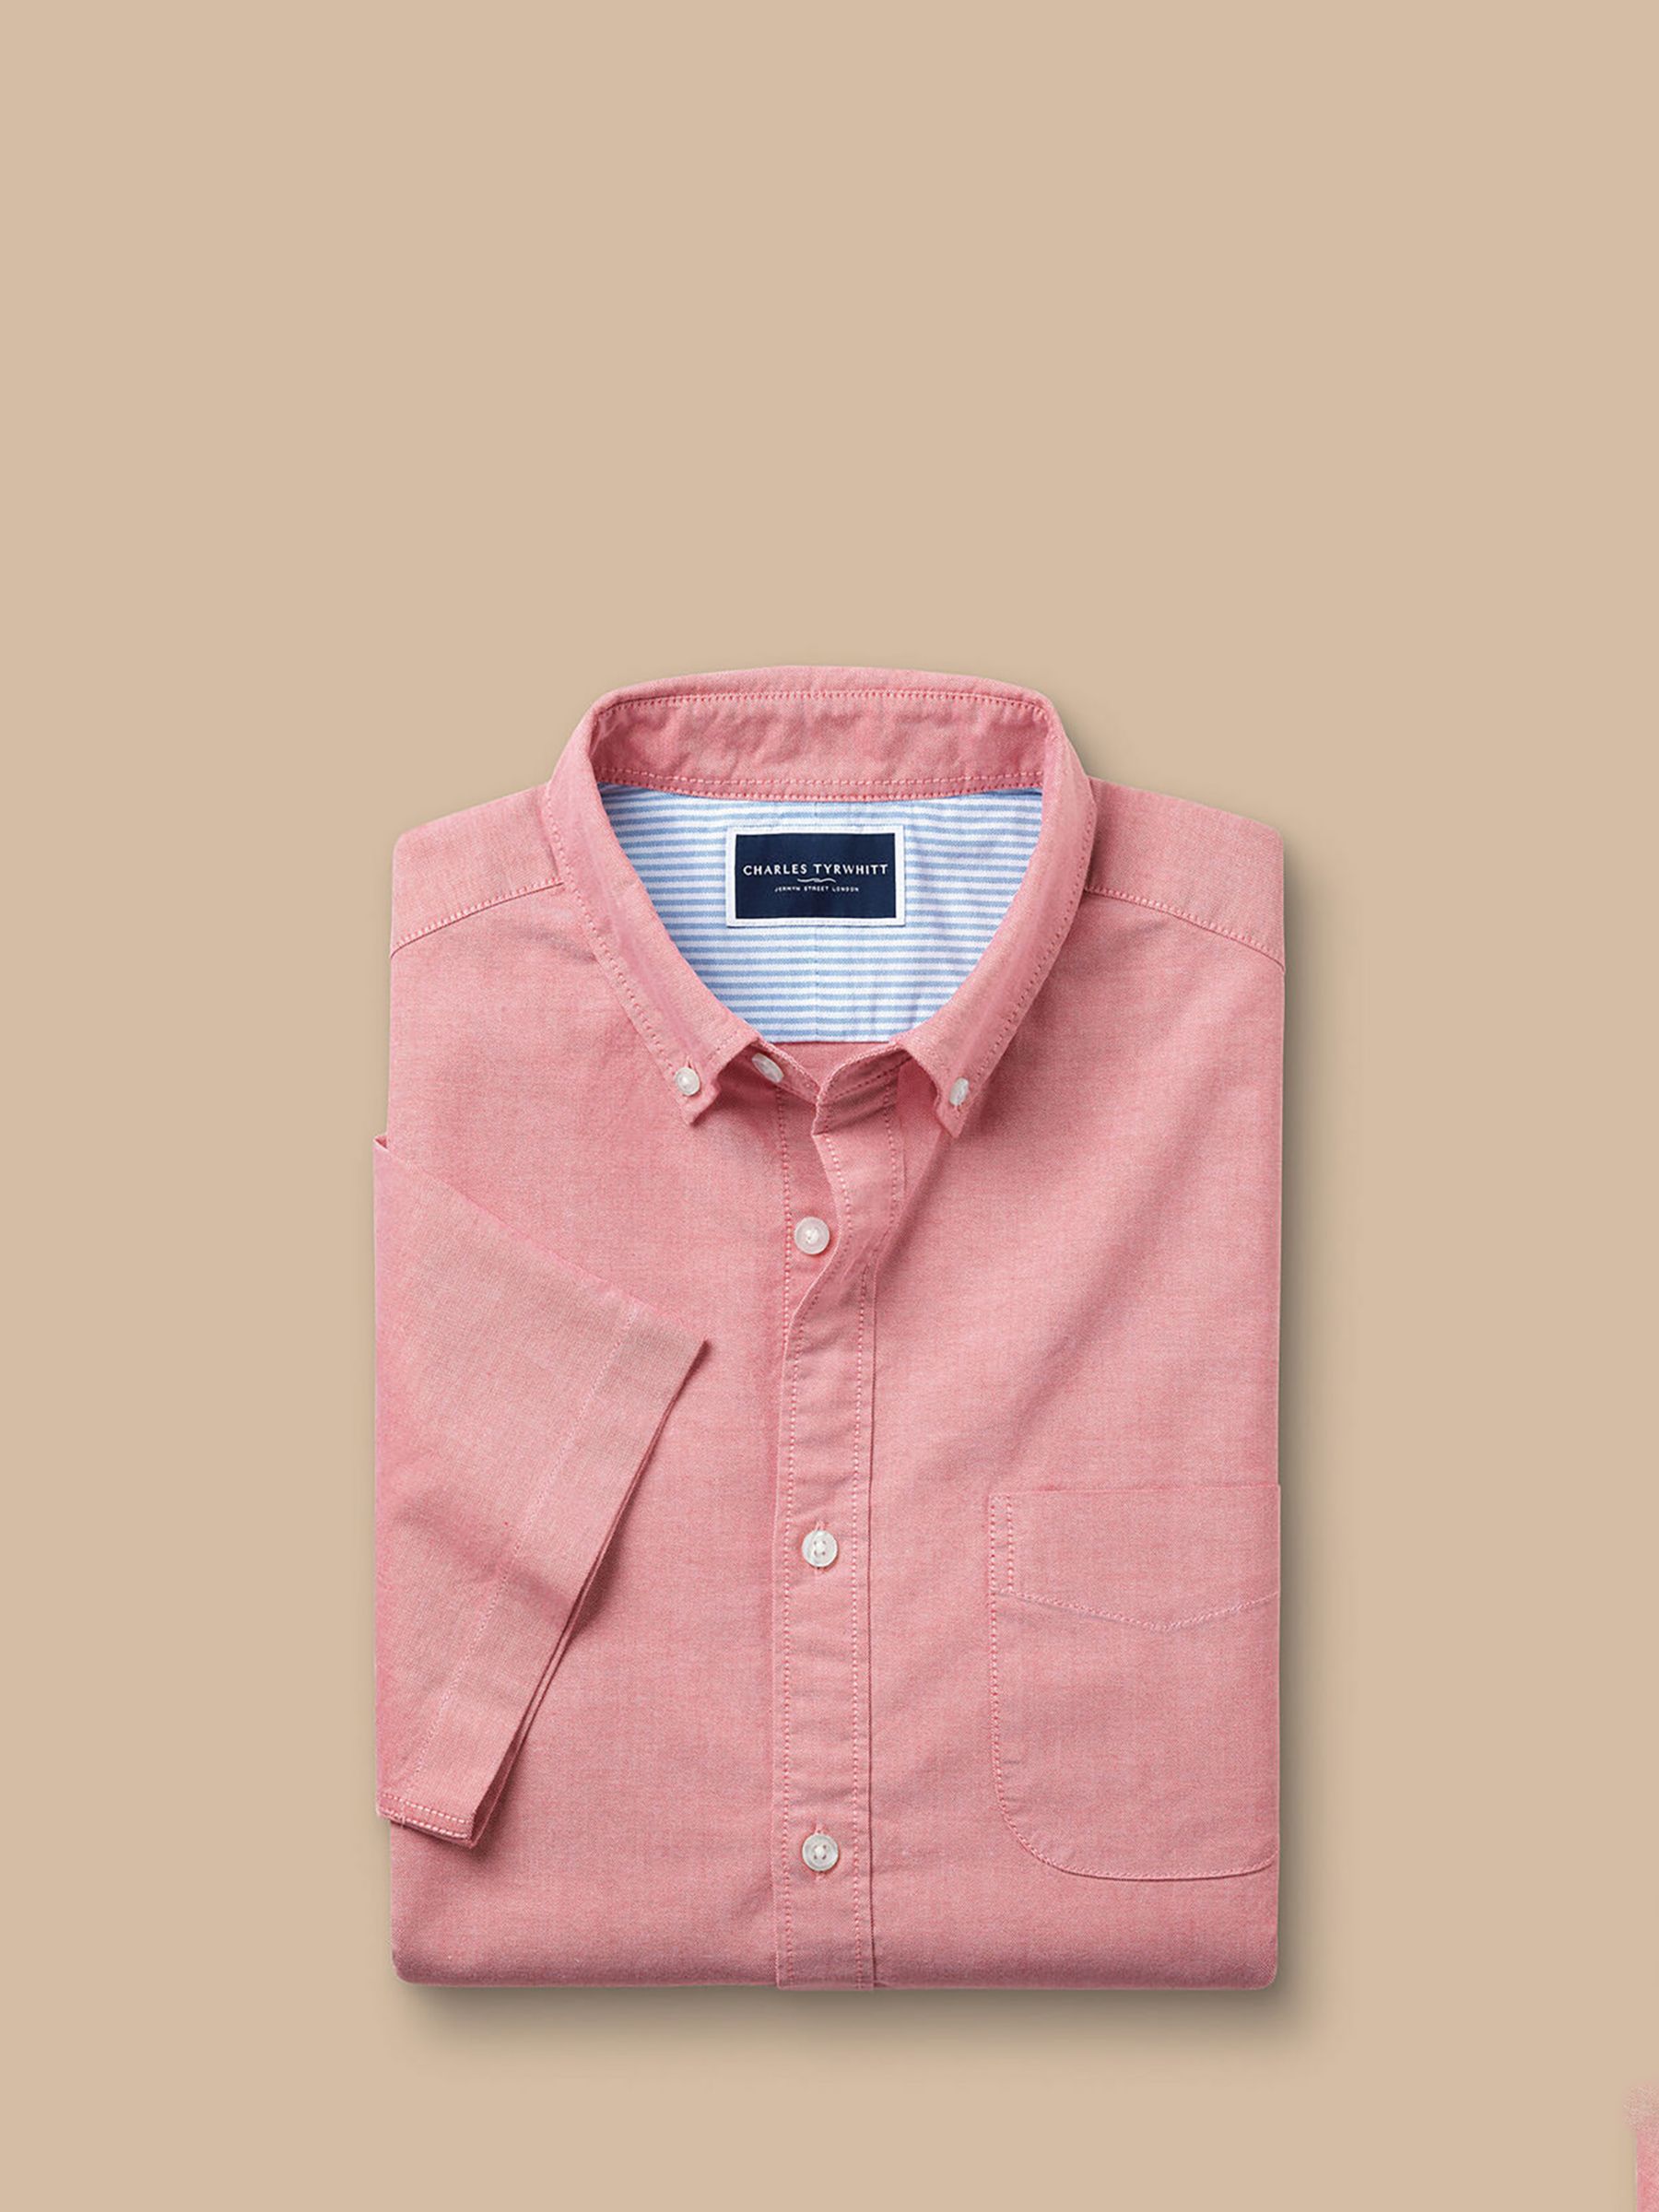 Charles Tyrwhitt Plain Short Sleeve Button Down Stretch Washed Oxford Shirt, Coral Pink, M